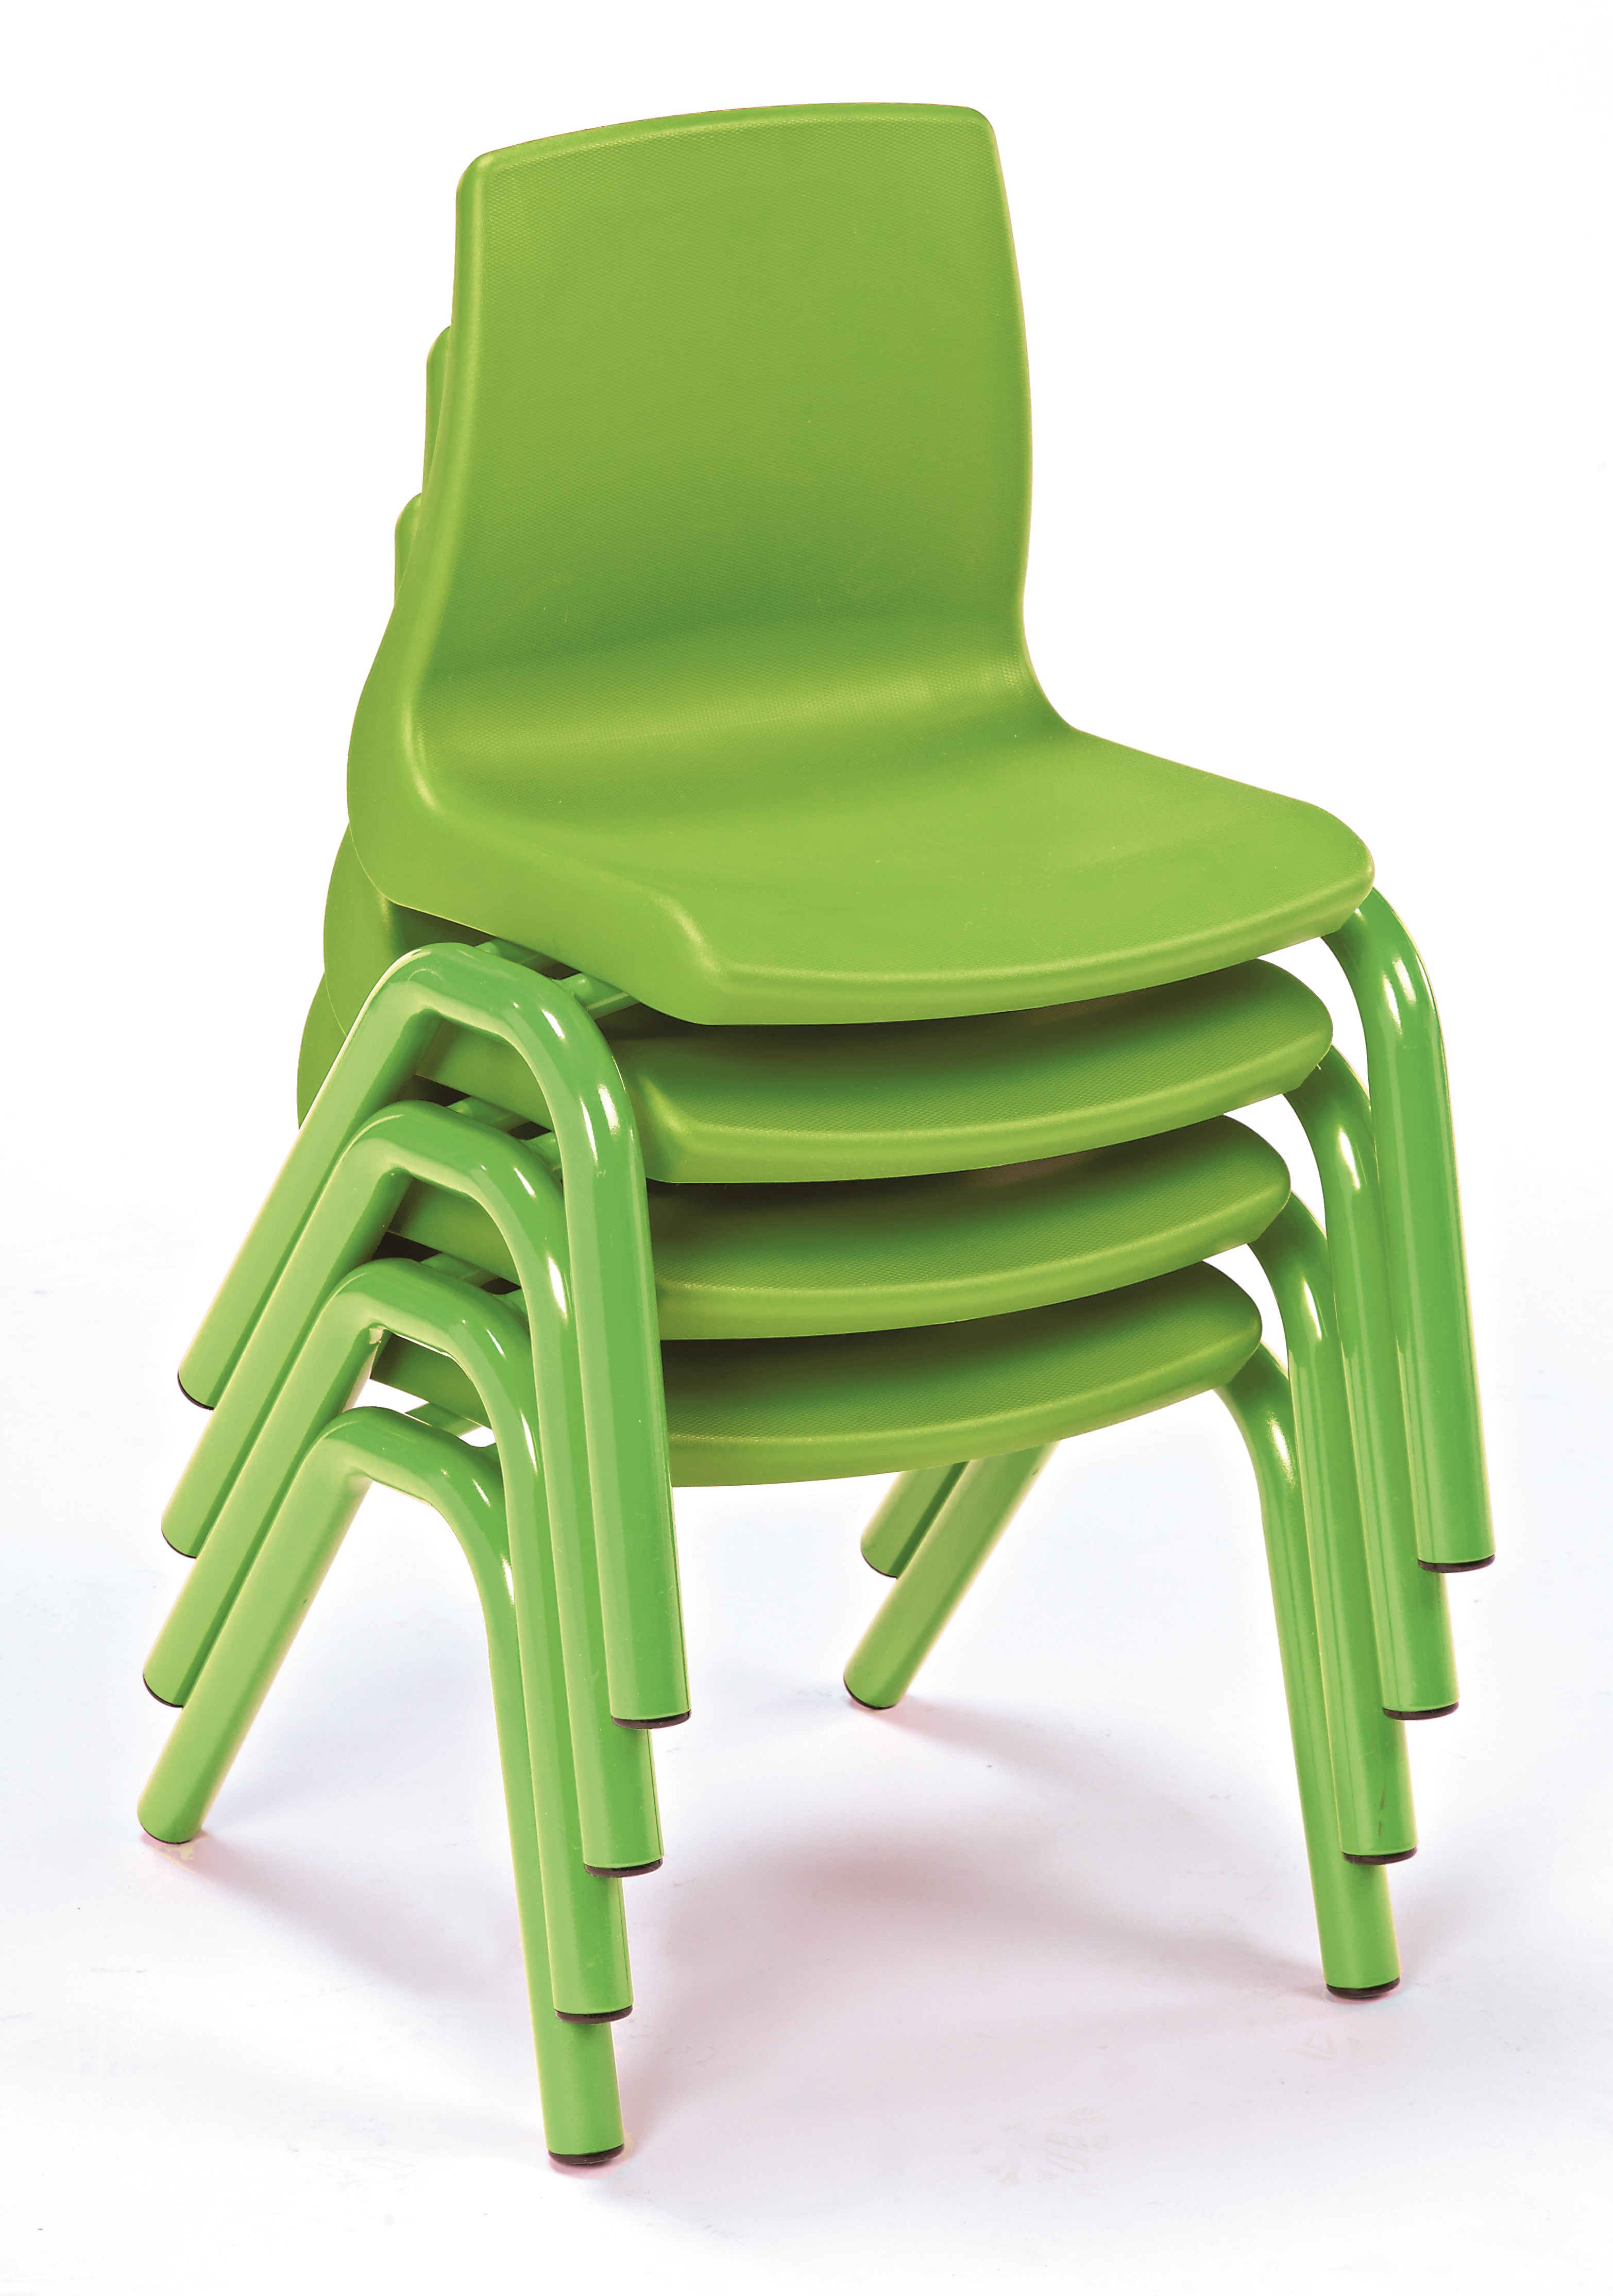 Harlequin Chairs Size A Lime